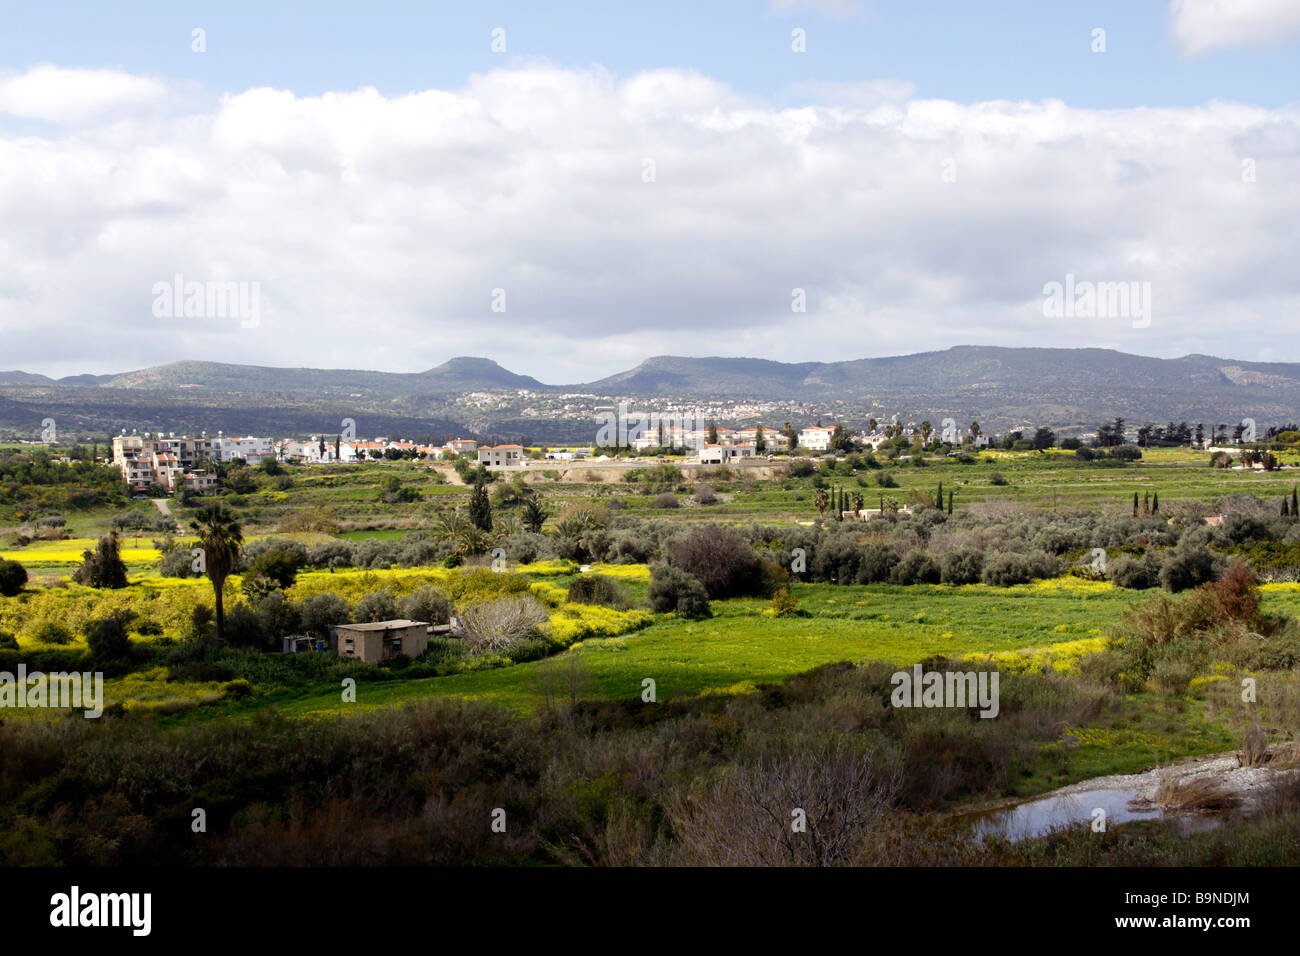 THE VIEW FROM THE VILLAGE OF POLIS TOWARDS LAKKI (LATSI) ON THE ISLAND OF CYPRUS. Stock Photo